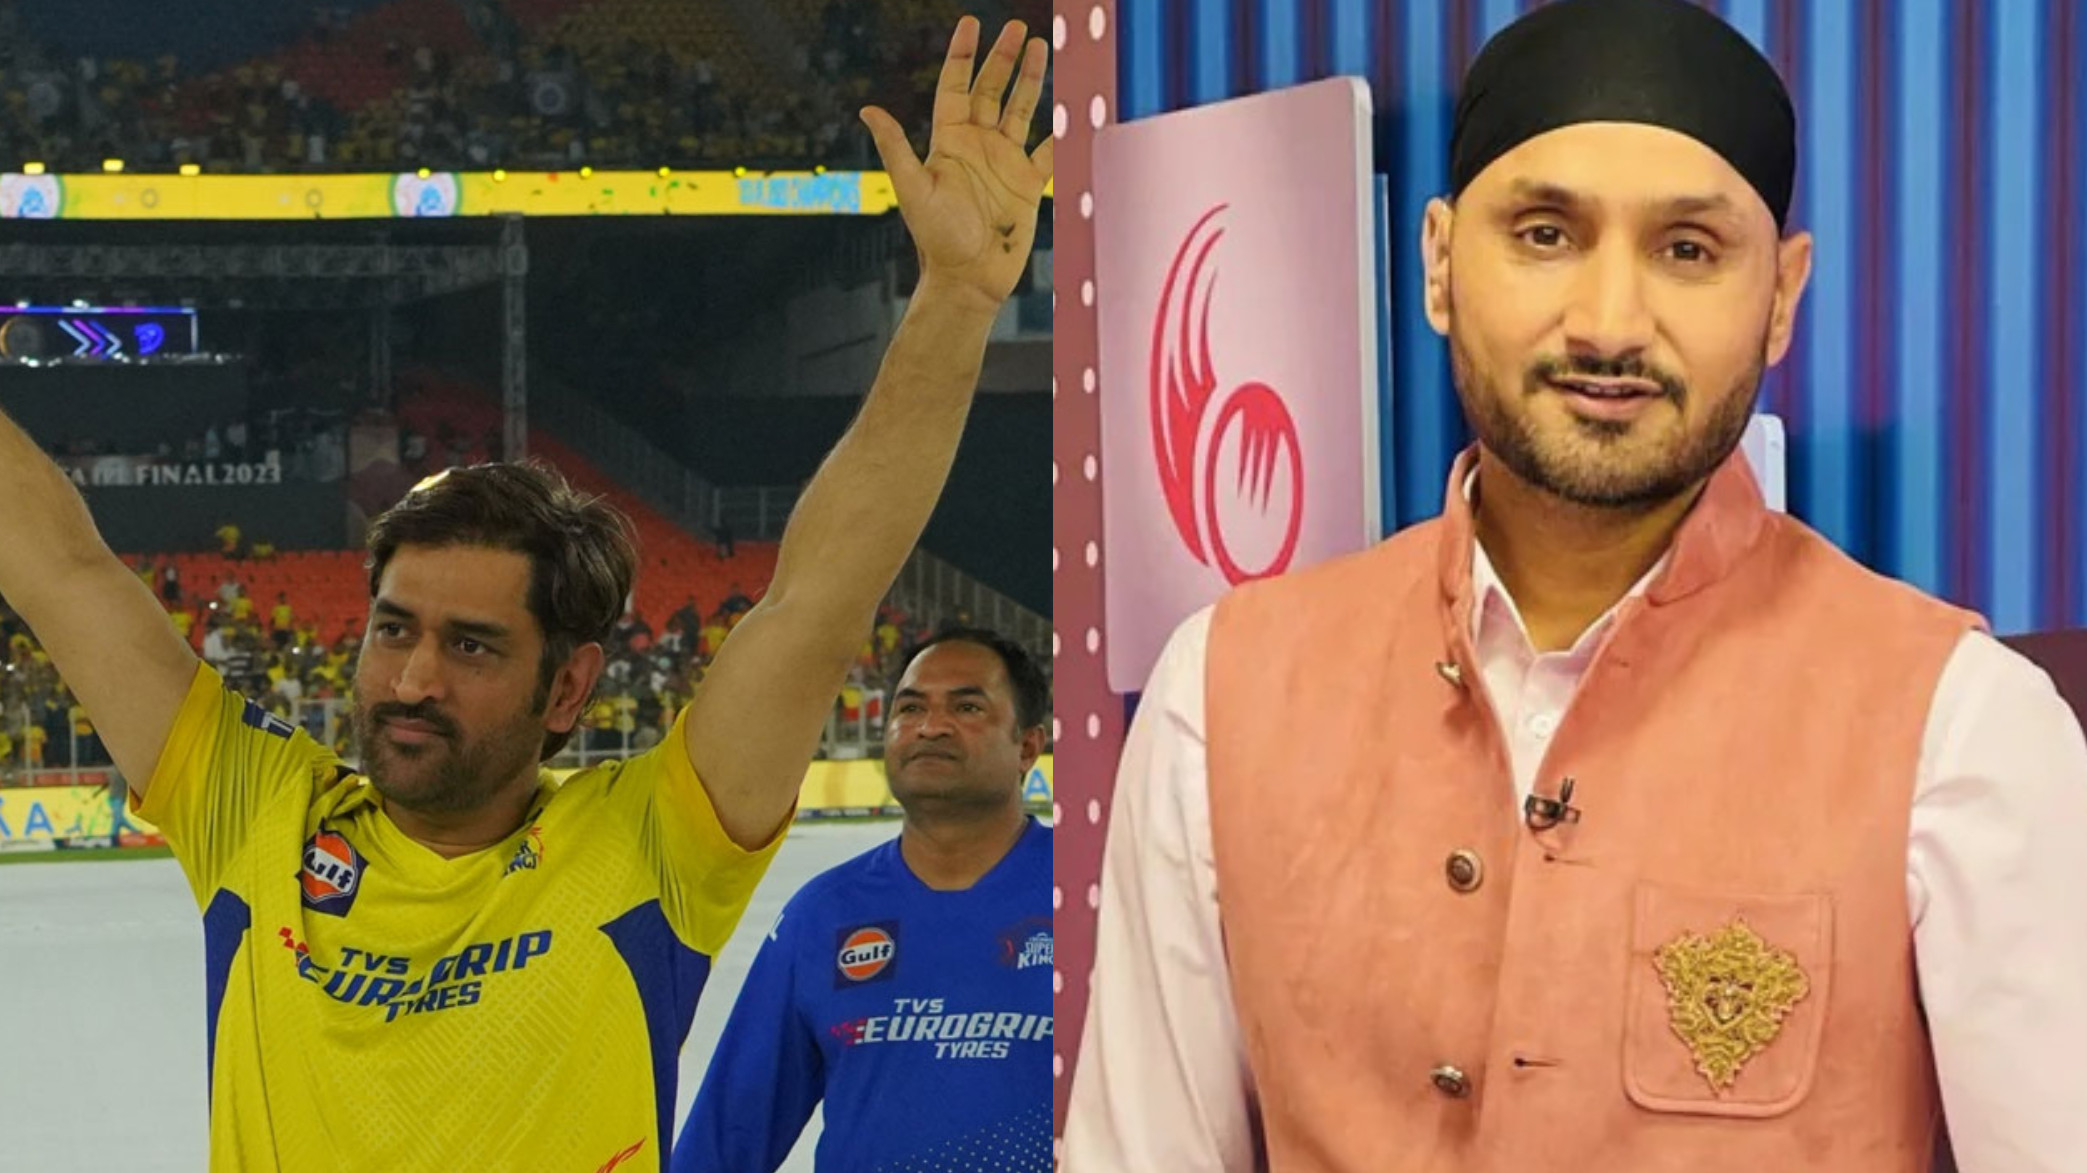 IPL 2023: “This is the biggest news for fans”- Harbhajan Singh on MS Dhoni playing one more IPL season